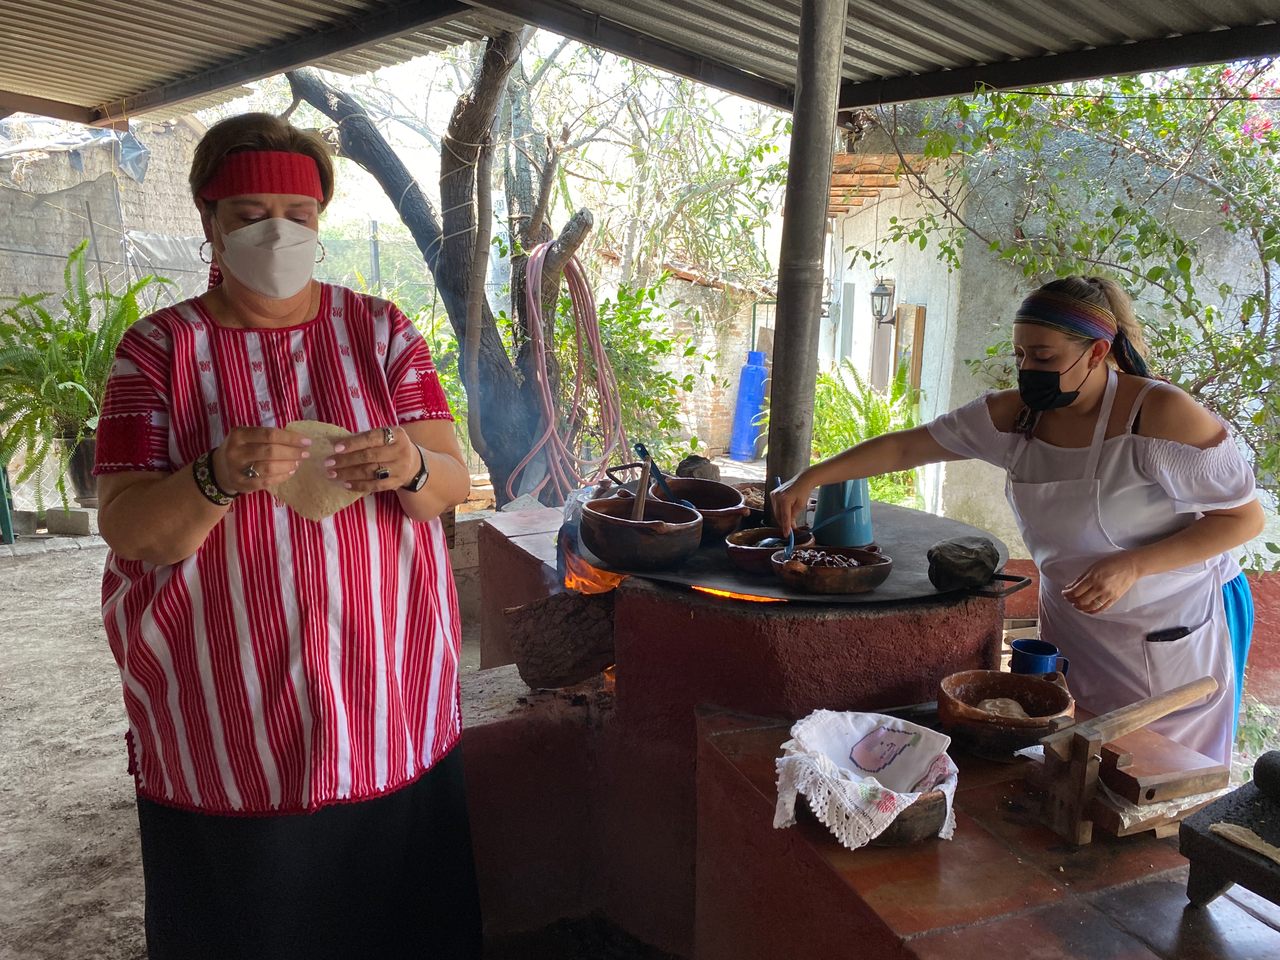 Maru Toledo and one of the "Mujeres del Maíz" make tortillas.